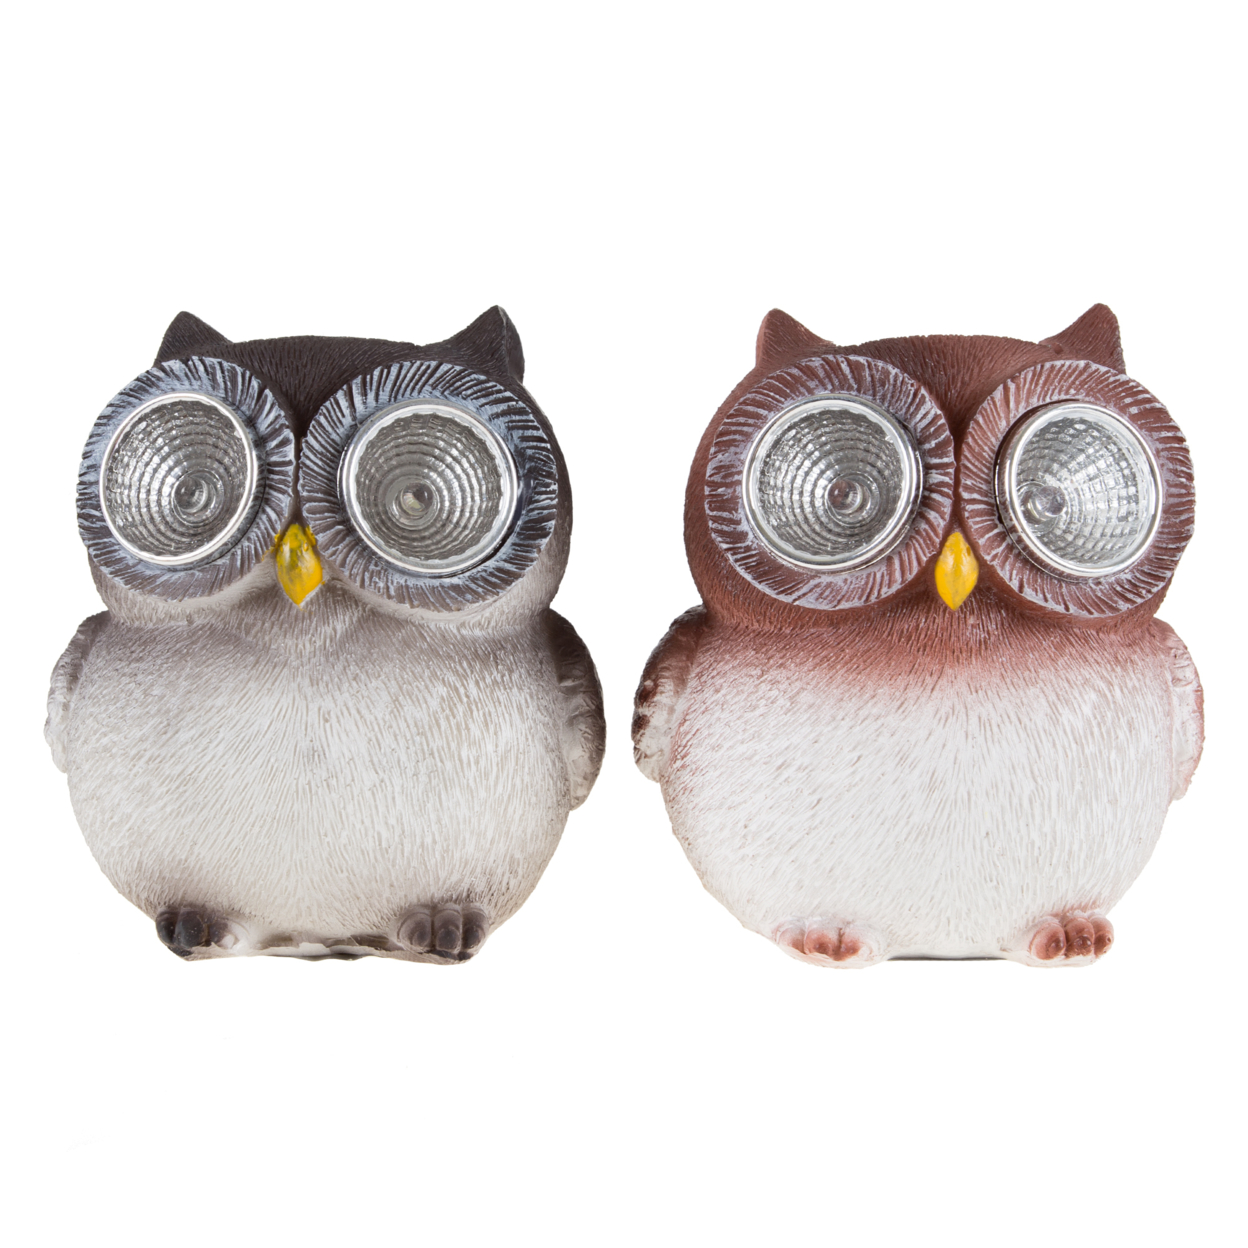 Set Of 2 Baby Owl Solar Lights For Garden, Yard Decor Flower Bed Window Sill 3.25 Inches High